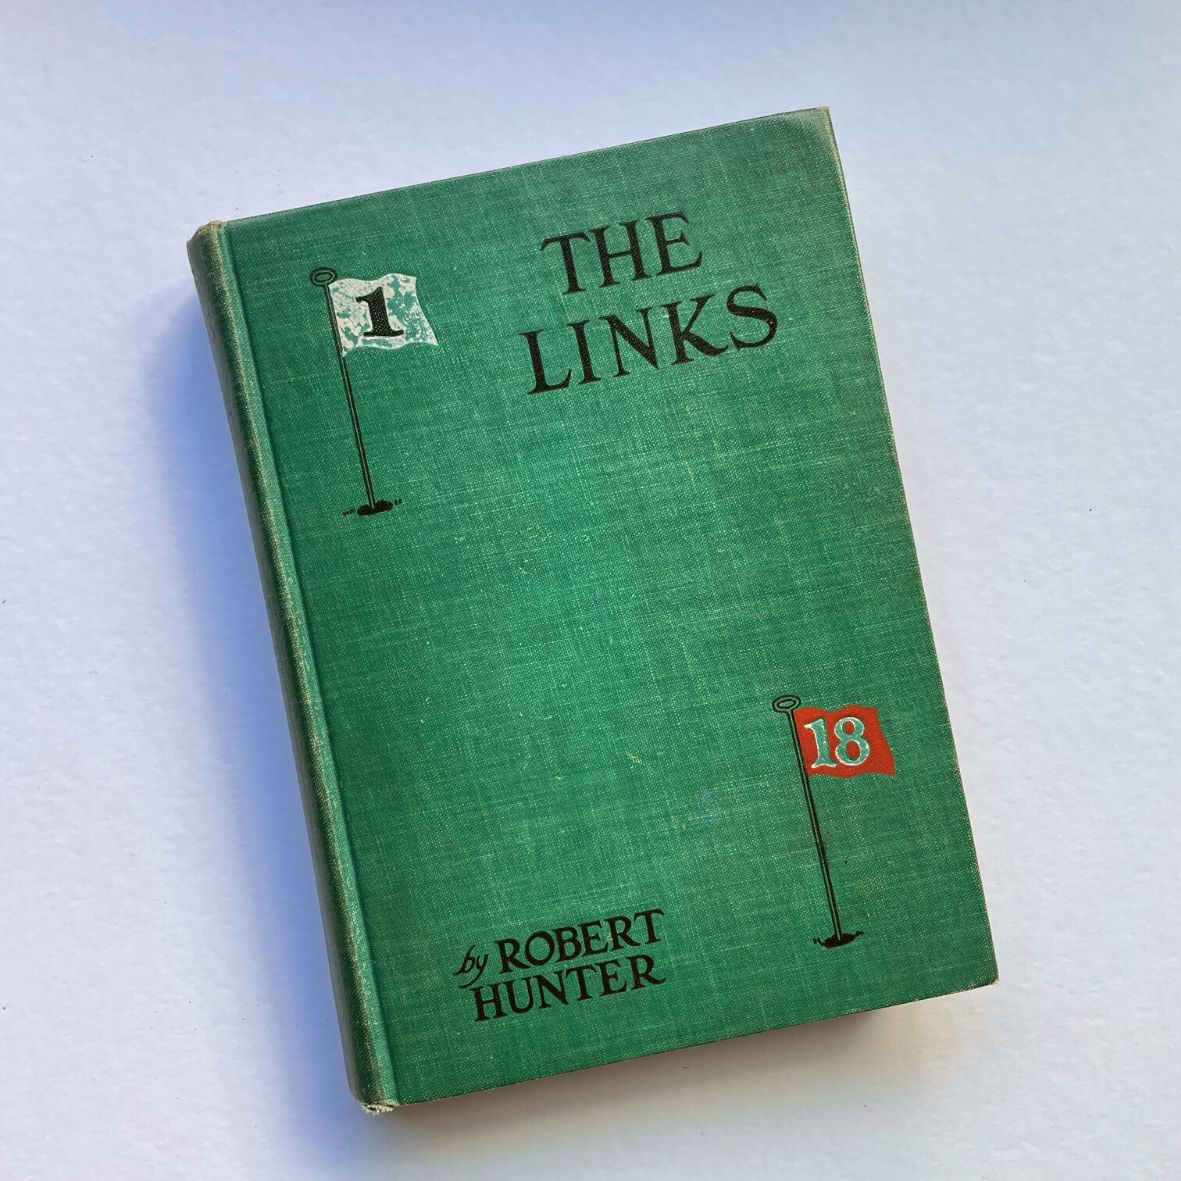 The Links by Robert Hunter - Rare 1926 First Edition